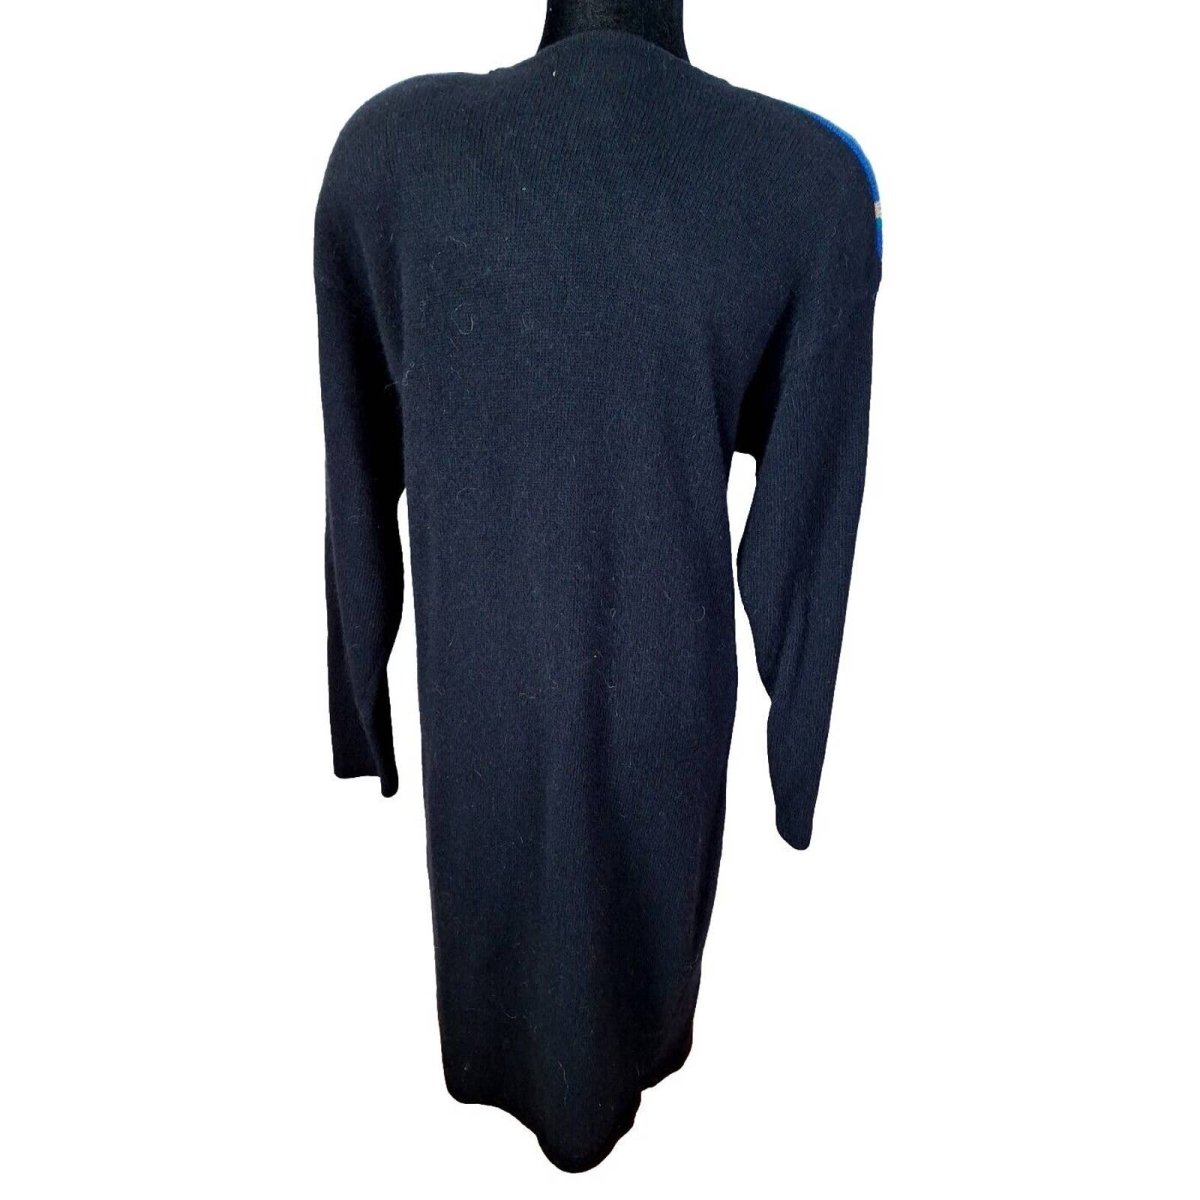 Vintage 80s/90s Lambswool/Angora Sweater Dress Women's Size M - themallvintage The Mall Vintage